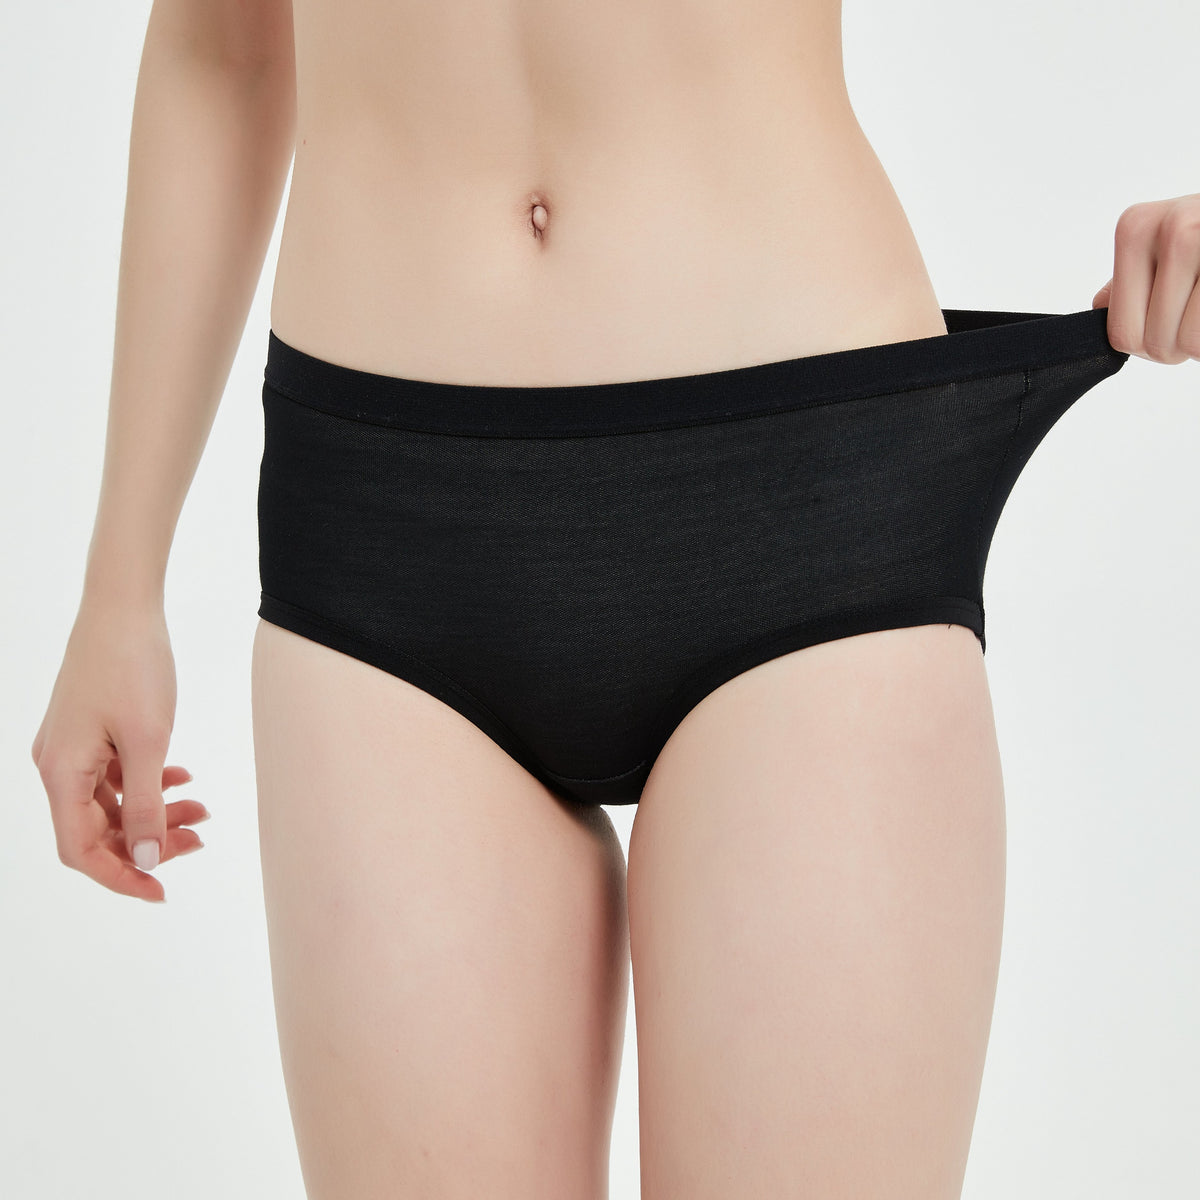 Radiation proof women underwear pant is very elastic, close view